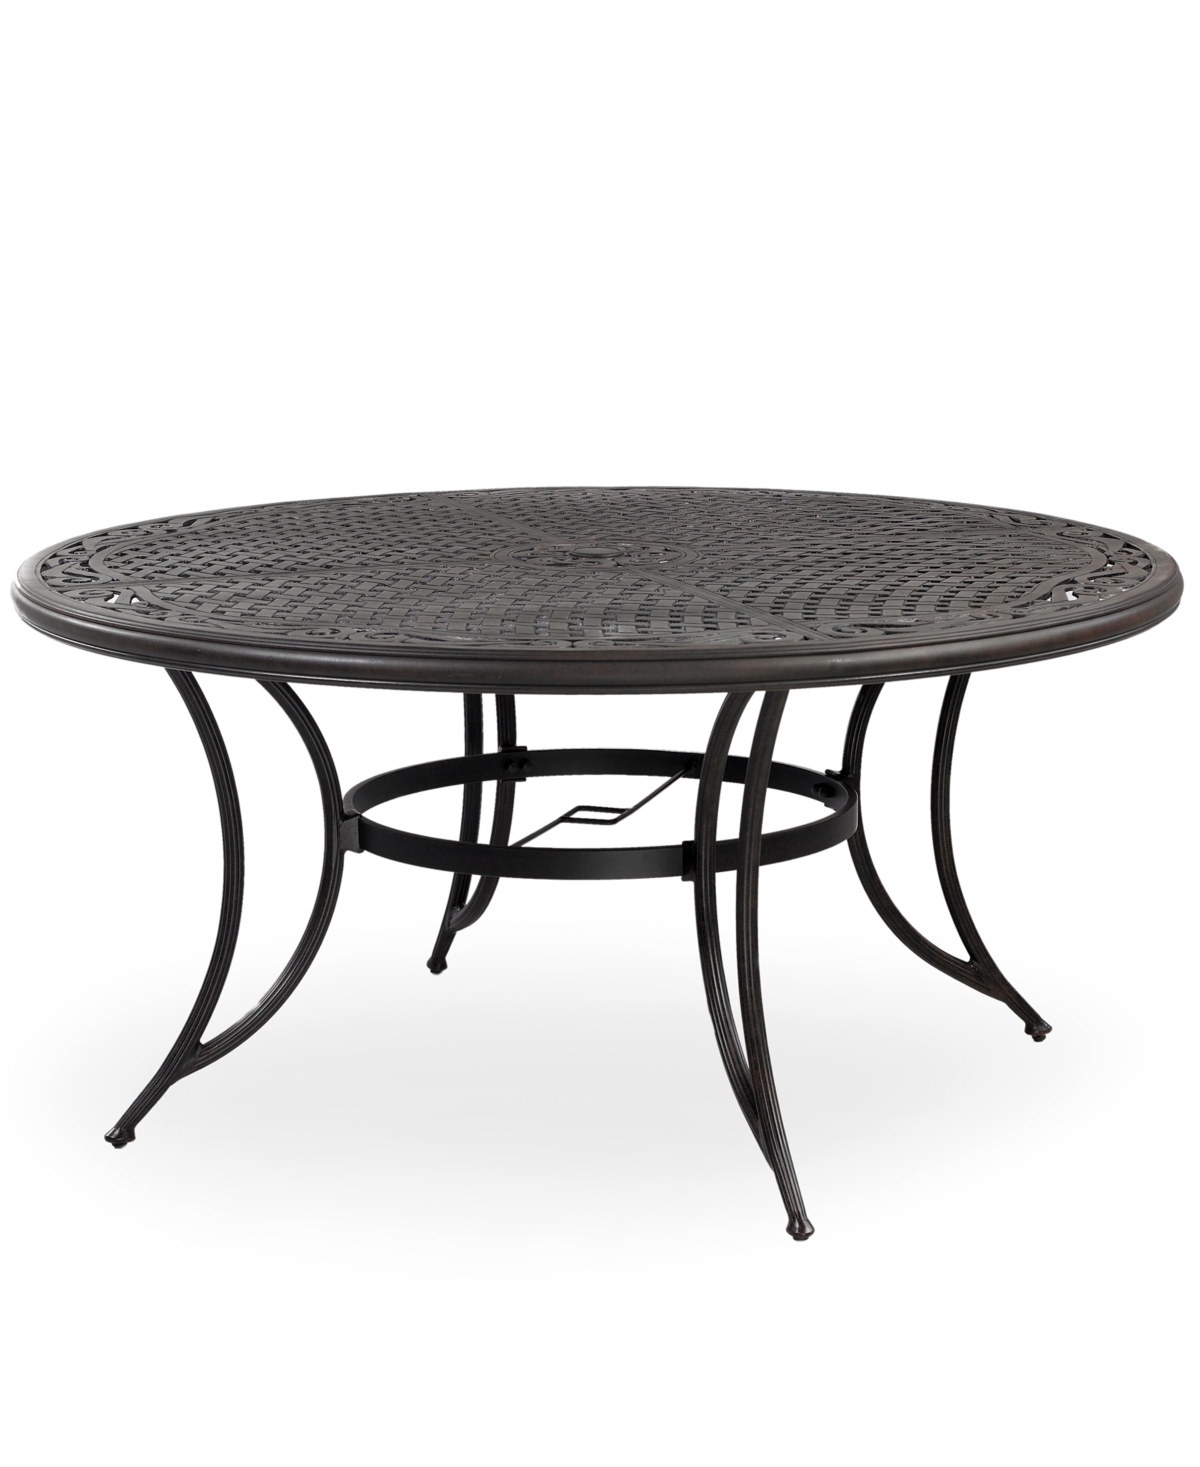 48 Round Aluminum Outdoor Dining Table, Created for Macys